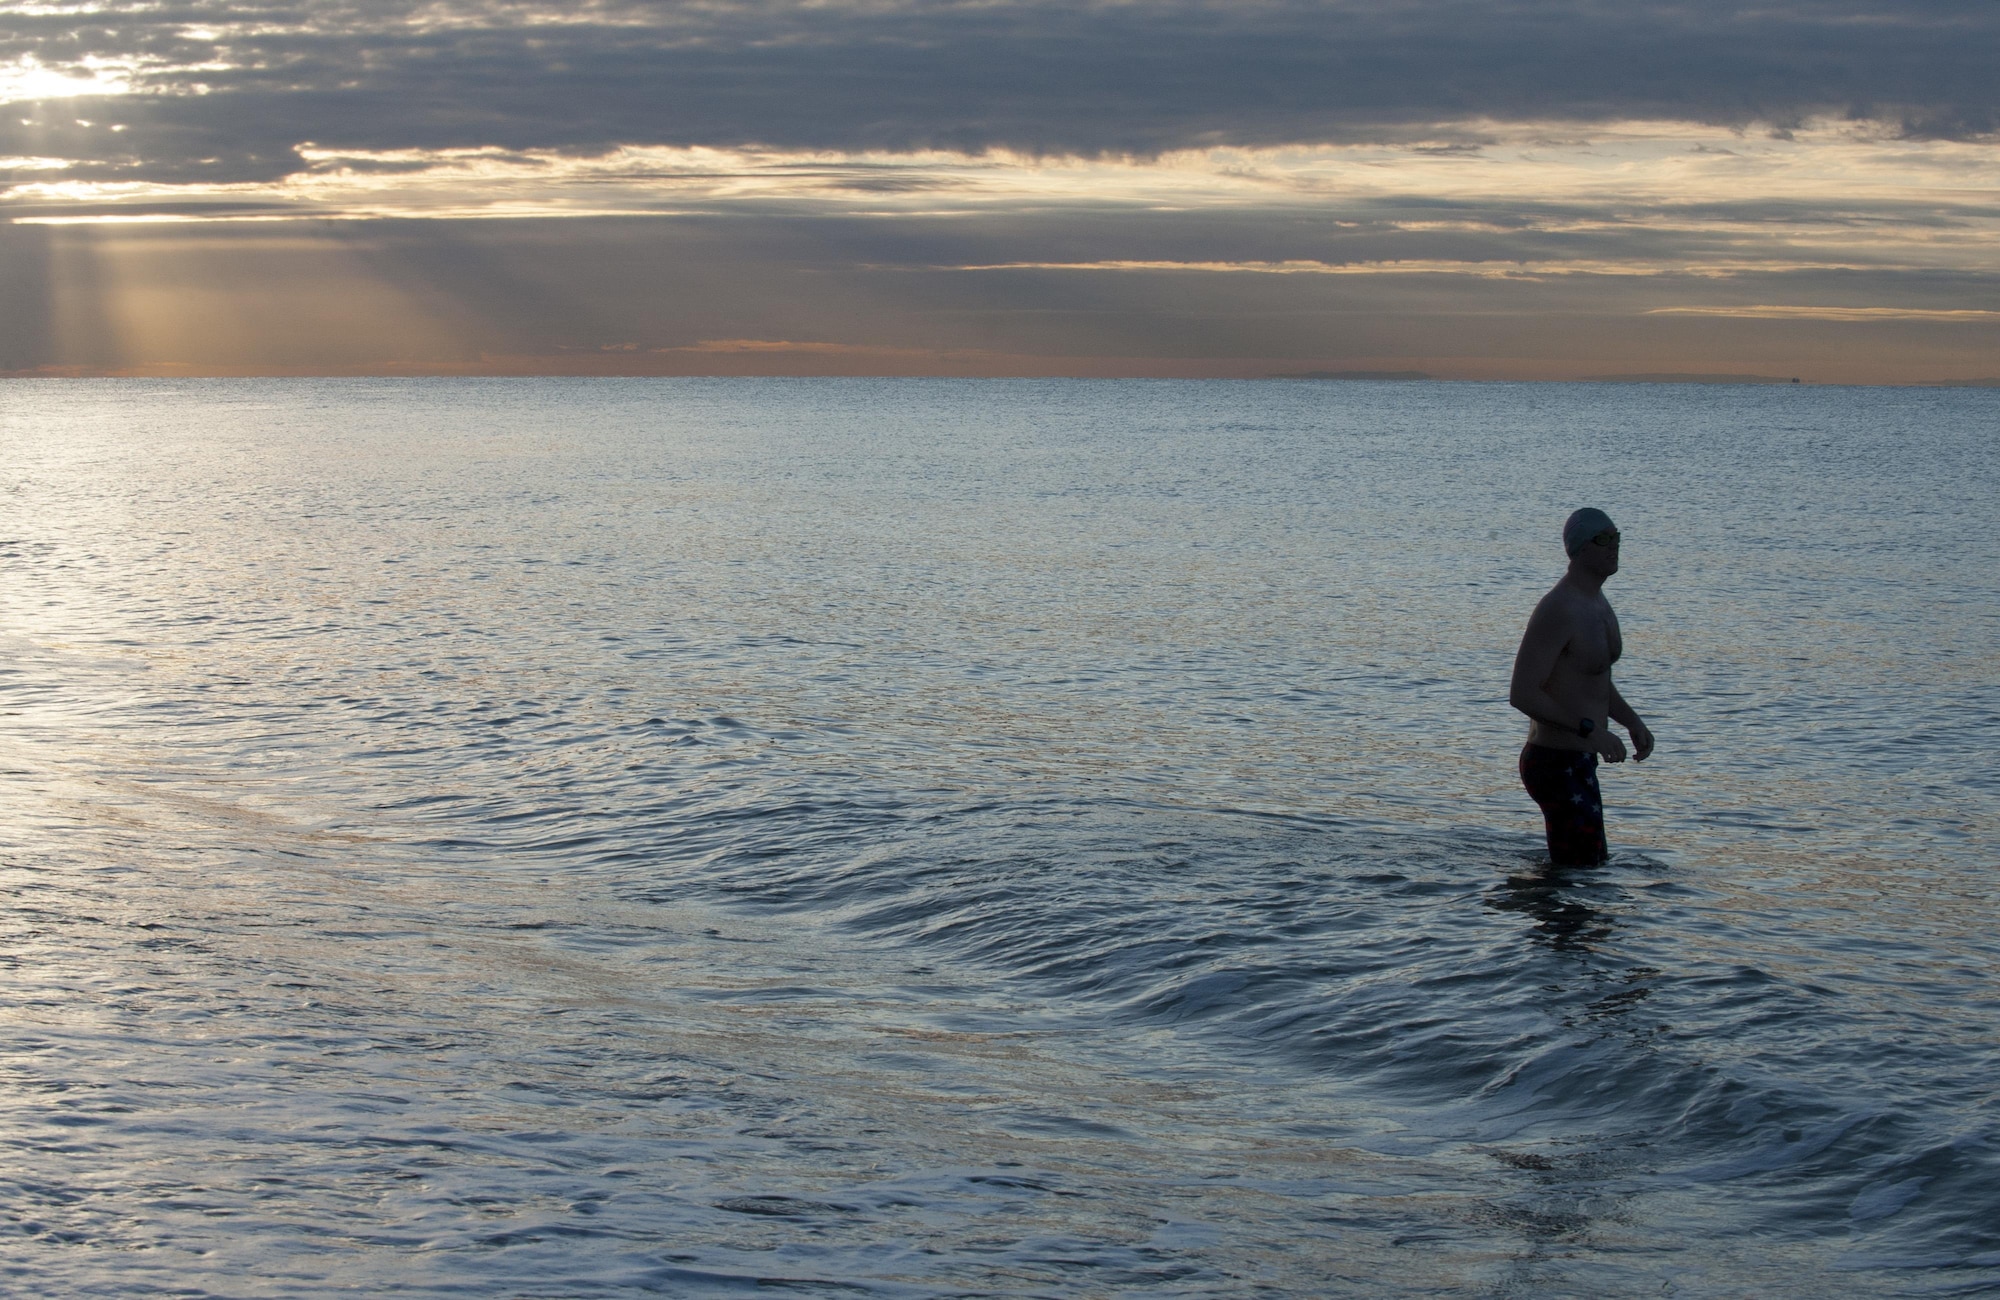 Maj. Casey Bowen, a dermatologist with the 59th Medical Wing at Joint Base San Antonio-Lackland, Texas, steps into the English Channel on the coastline of Folkestone, England, for a practice swim Sept. 23, 2016. Bowen and Maj. Simon Ritchie traveled to England to swim across the English Channel from Dover Harbor to the coastline of France. (DoD News photo/Tech. Sgt. Brian Kimball)